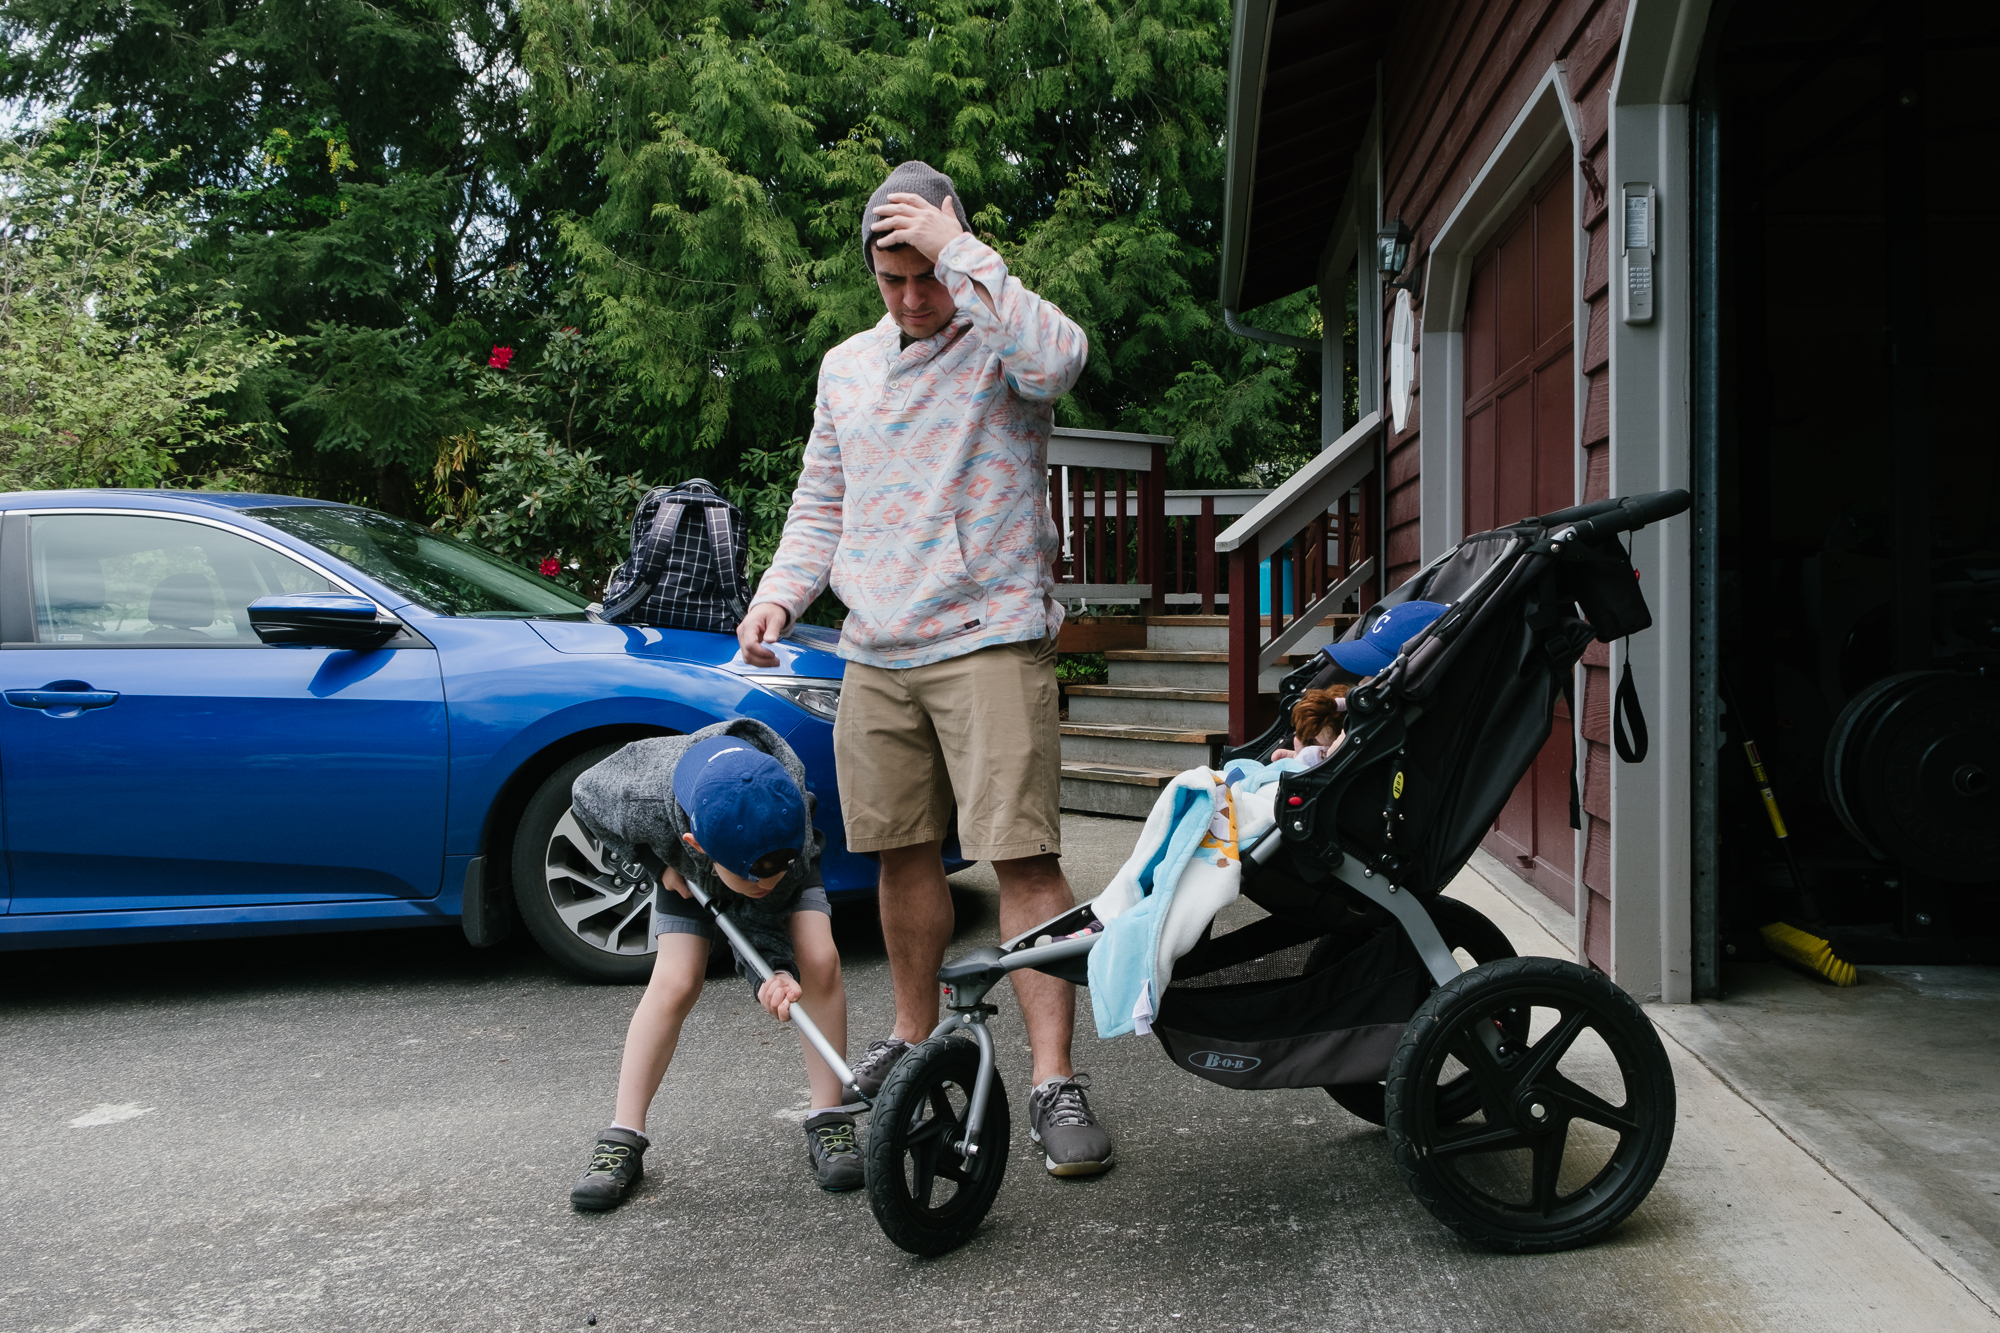 boy attempts to pump air into stroller tire - documentary family photography